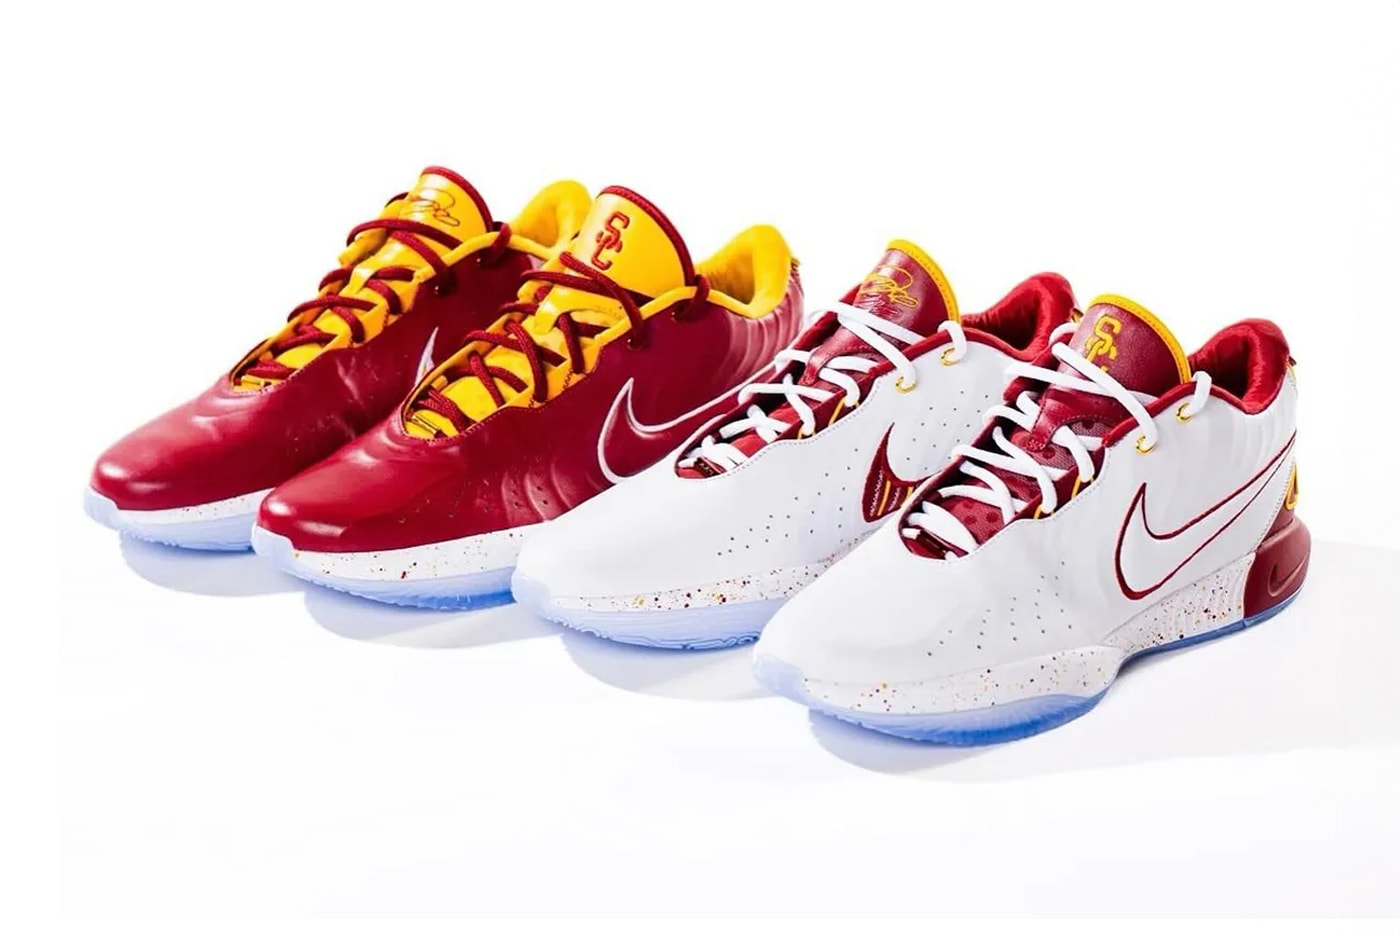 Bronny's USC Basketball Team Receives Two Custom Pairs of Nike LeBron 21 PEs lebron james king james beats red white gold yellow trojans university of southern california swoosh usc hoops